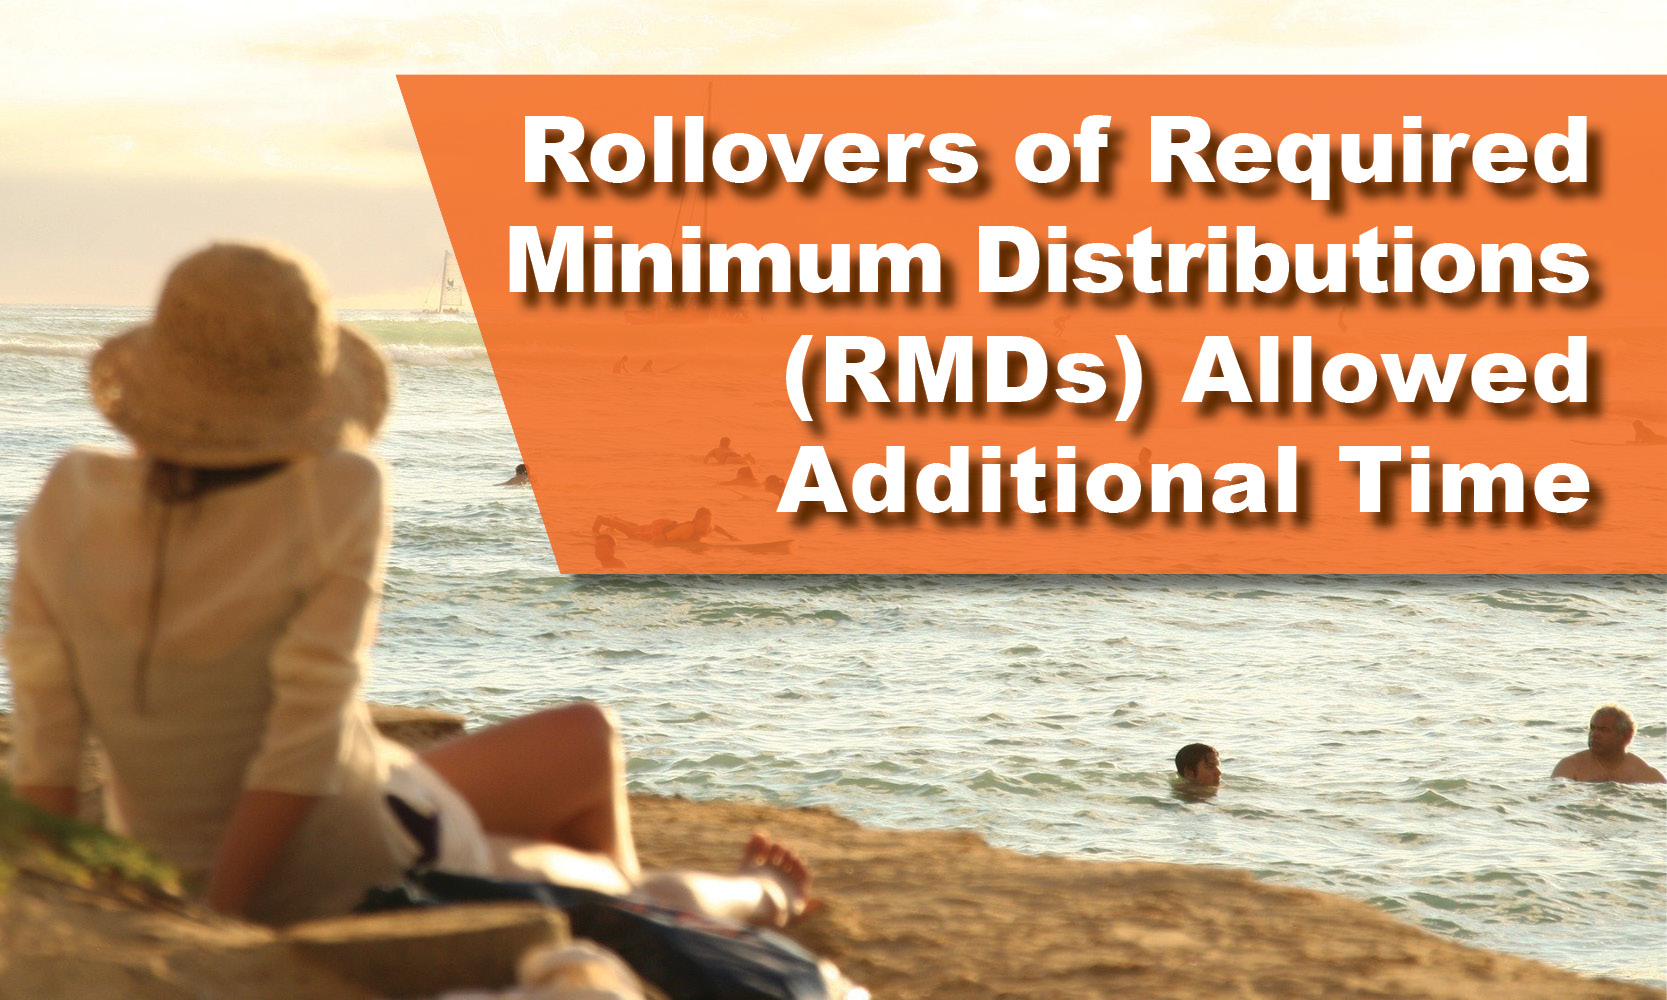 Rollovers of Required Minimum Distributions (RMDs) Allowed Additional Time